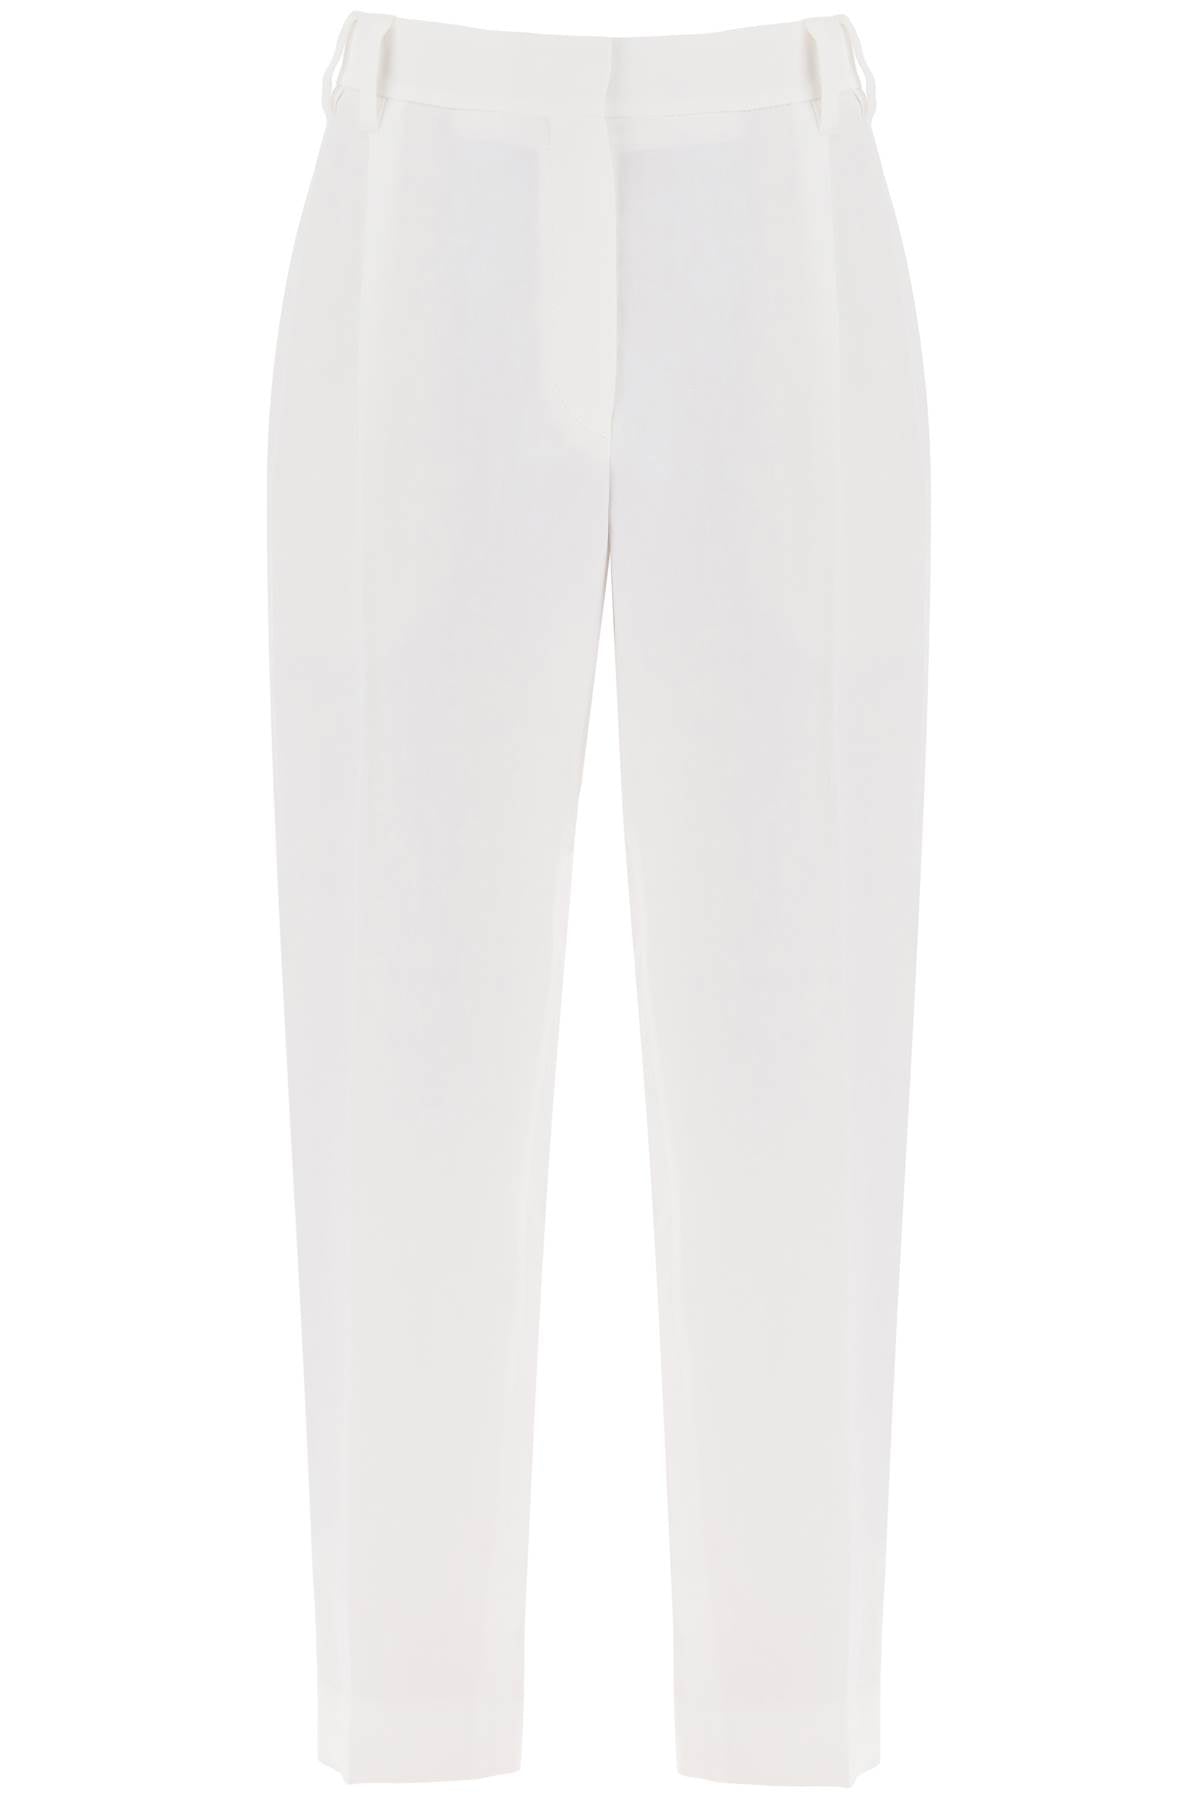 Brunello cucinelli tapered pants with ple-women > clothing > trousers-Brunello Cucinelli-Urbanheer